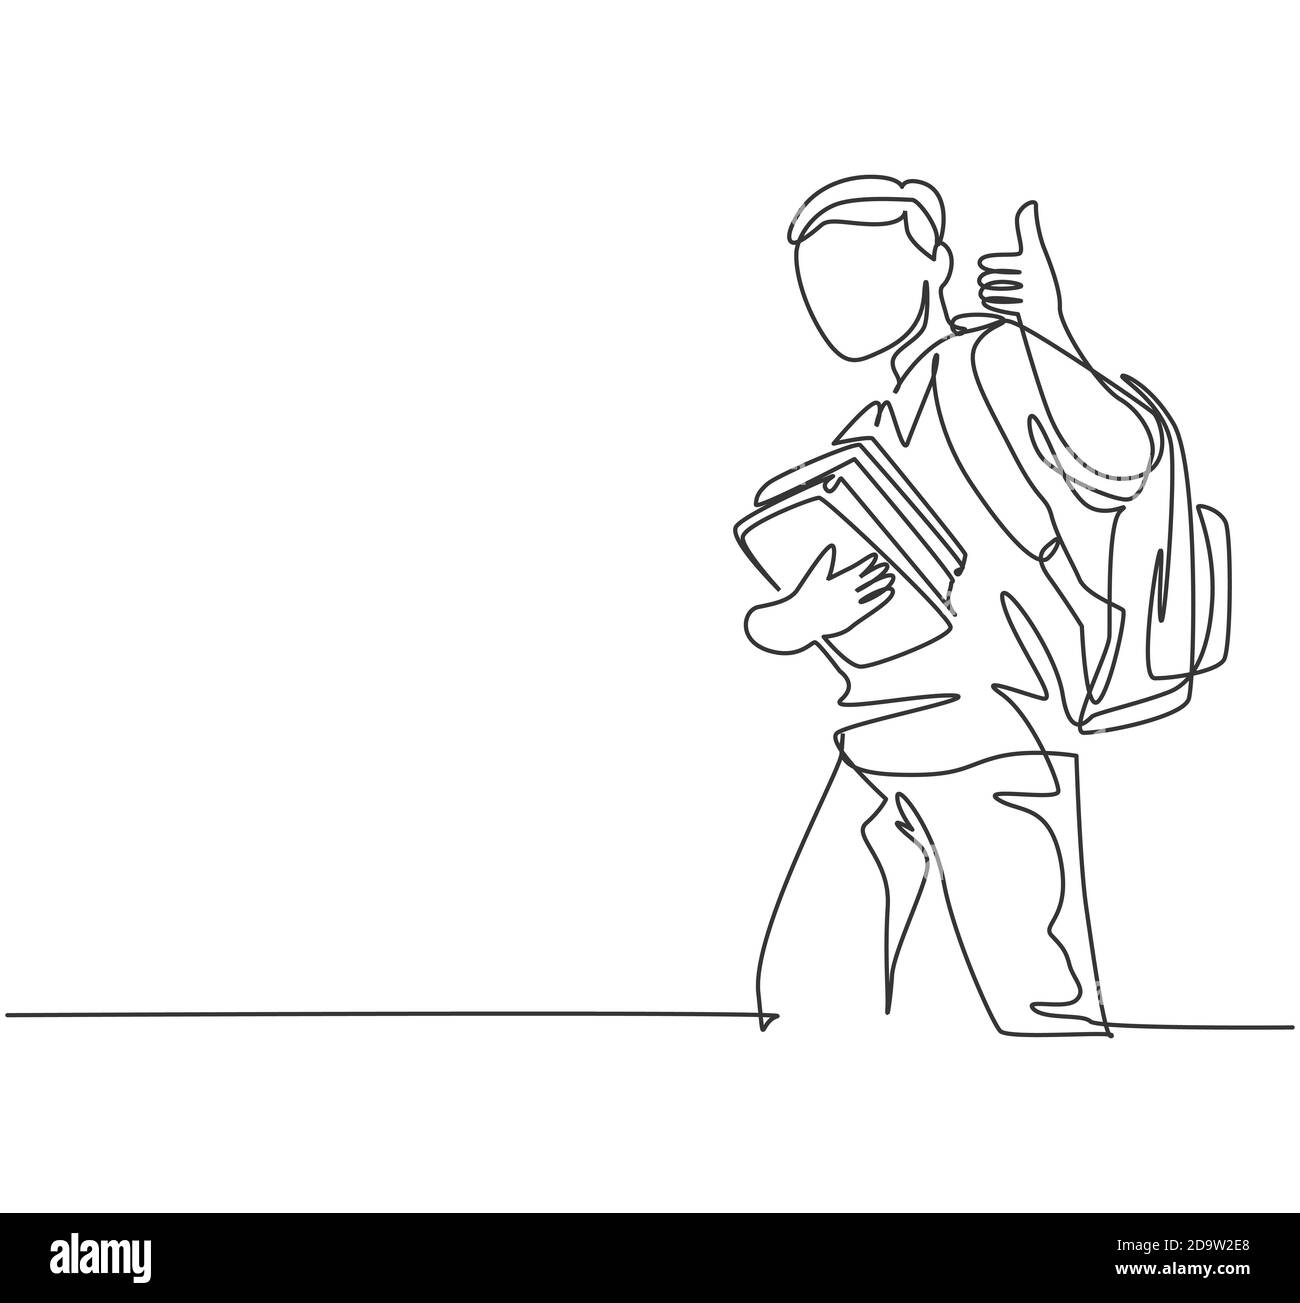 One line drawing of young happy elementary school boy student carrying stack of books and giving thumbs up gesture. Education concept continuous line Stock Vector